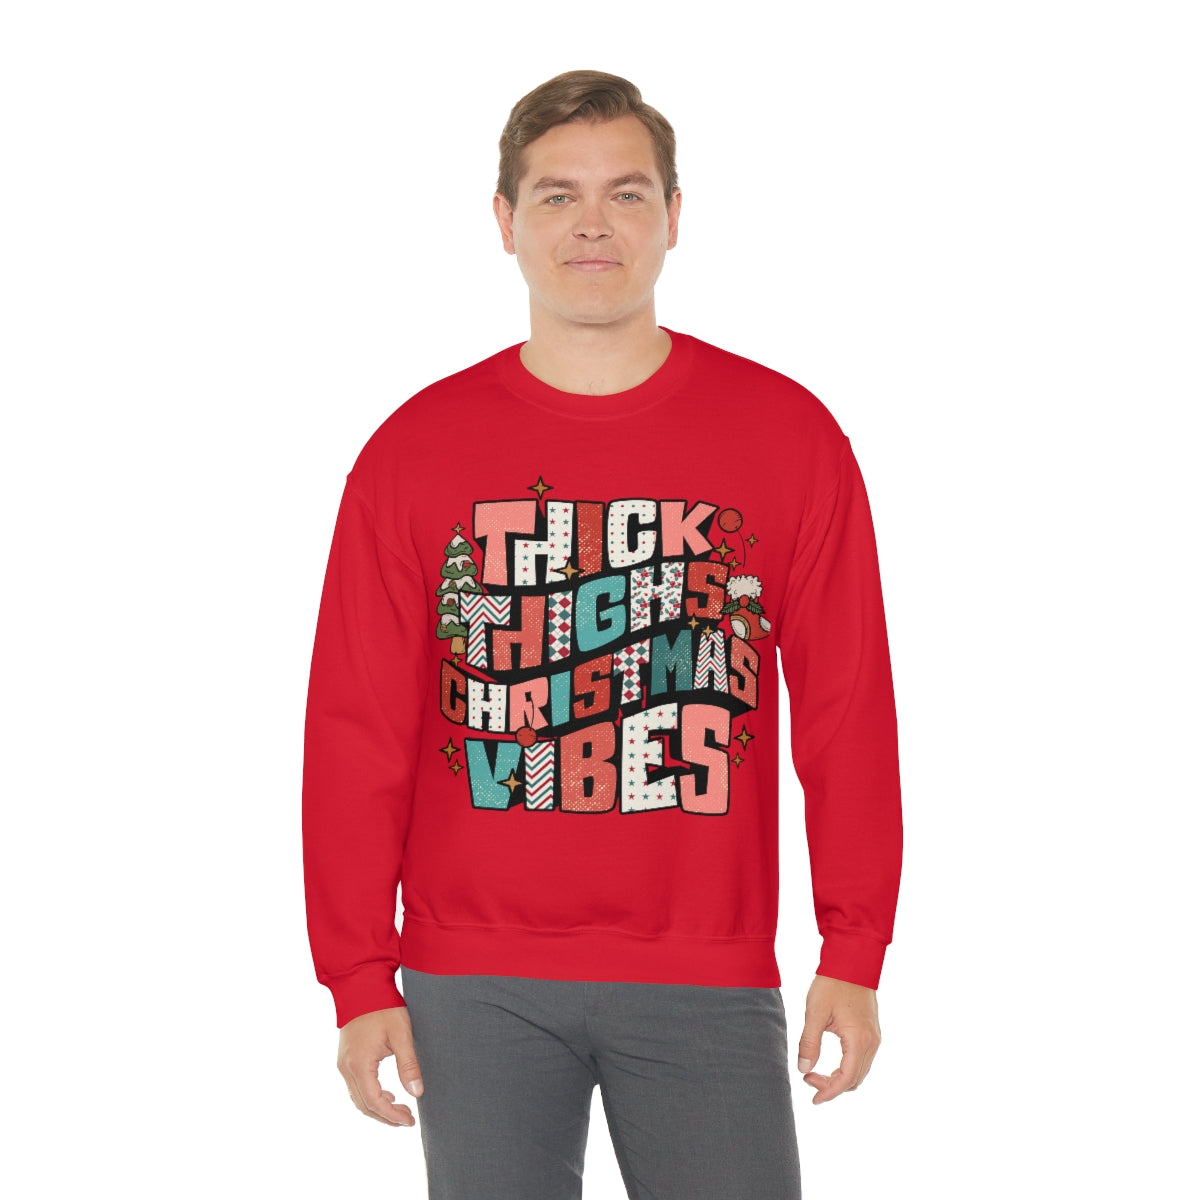 Thick Thighs and Christmas Vibes Sweatshirt